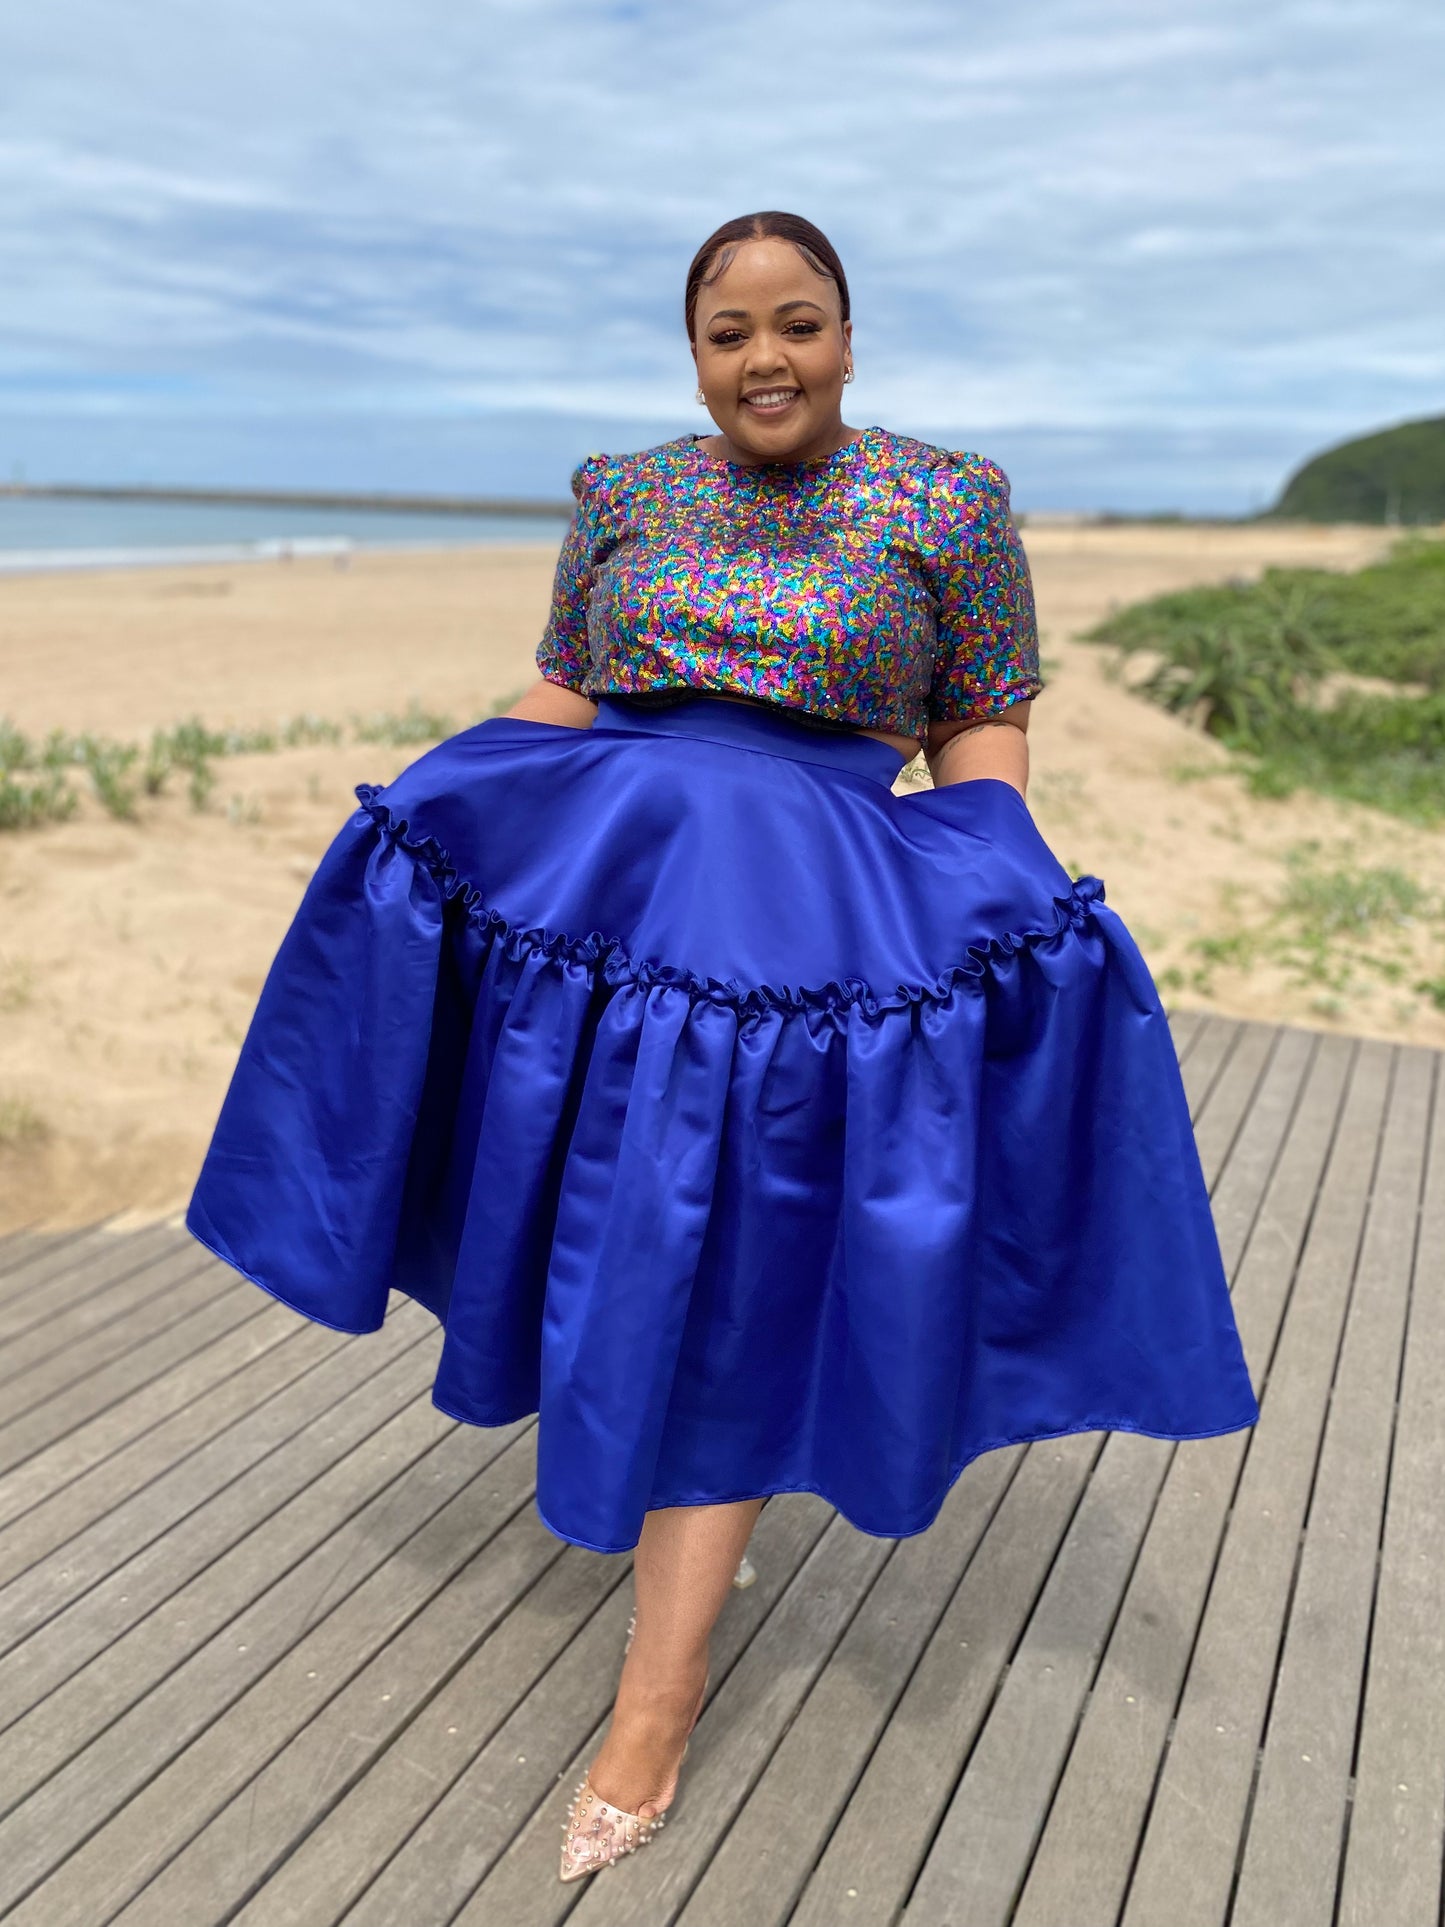 Royal blue duchess skirt (allow 3-5 days for completion of order)